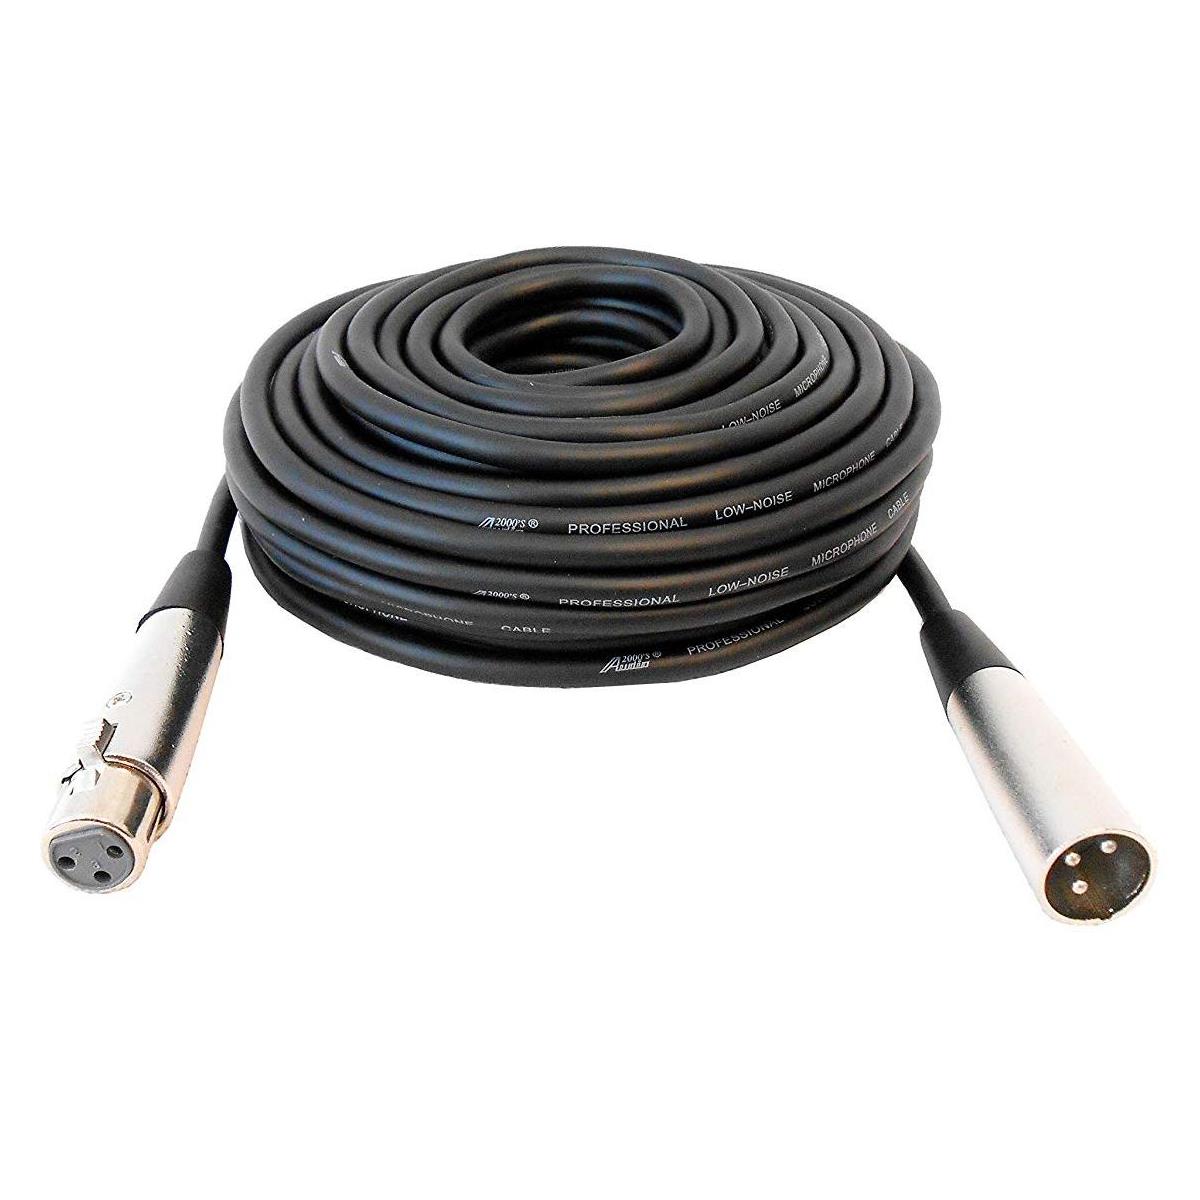 Image of Audio 2000s ADC203B 50'x6mm XLR Female to XLR Male Shielded Balanced Audio Cable